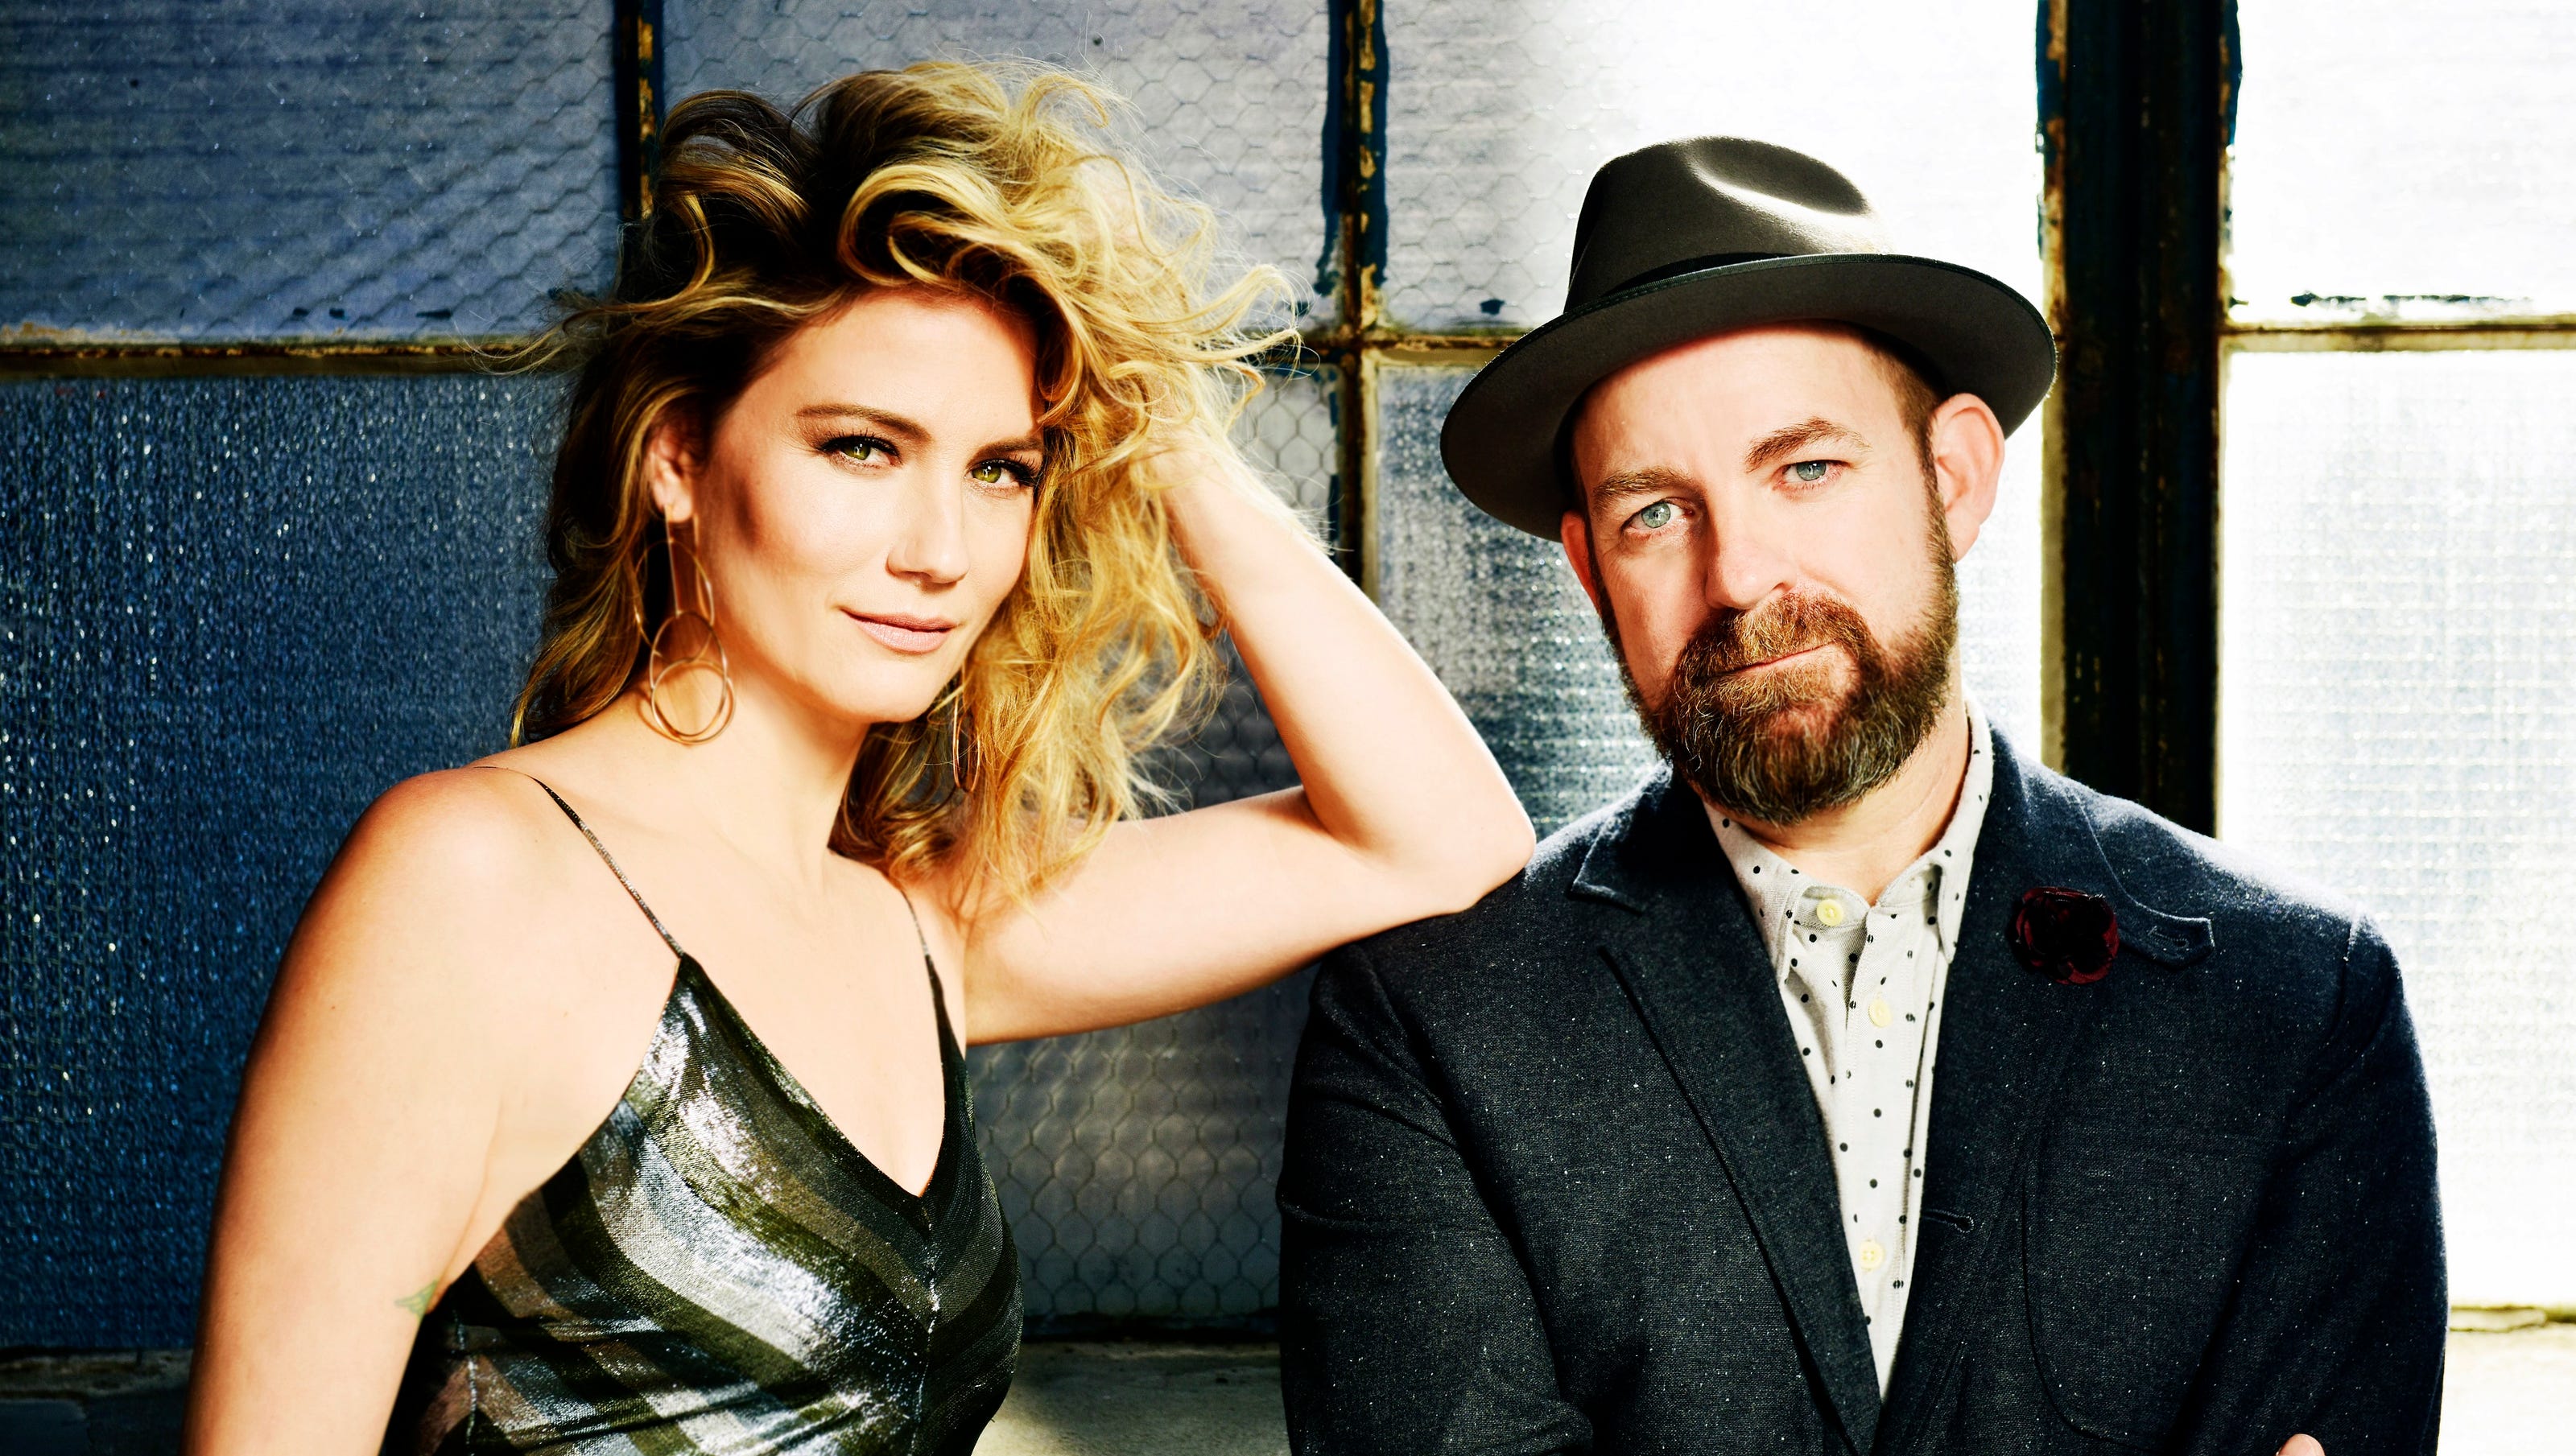 Sugarland's Kristian Bush on reuniting with Jennifer Nettles for